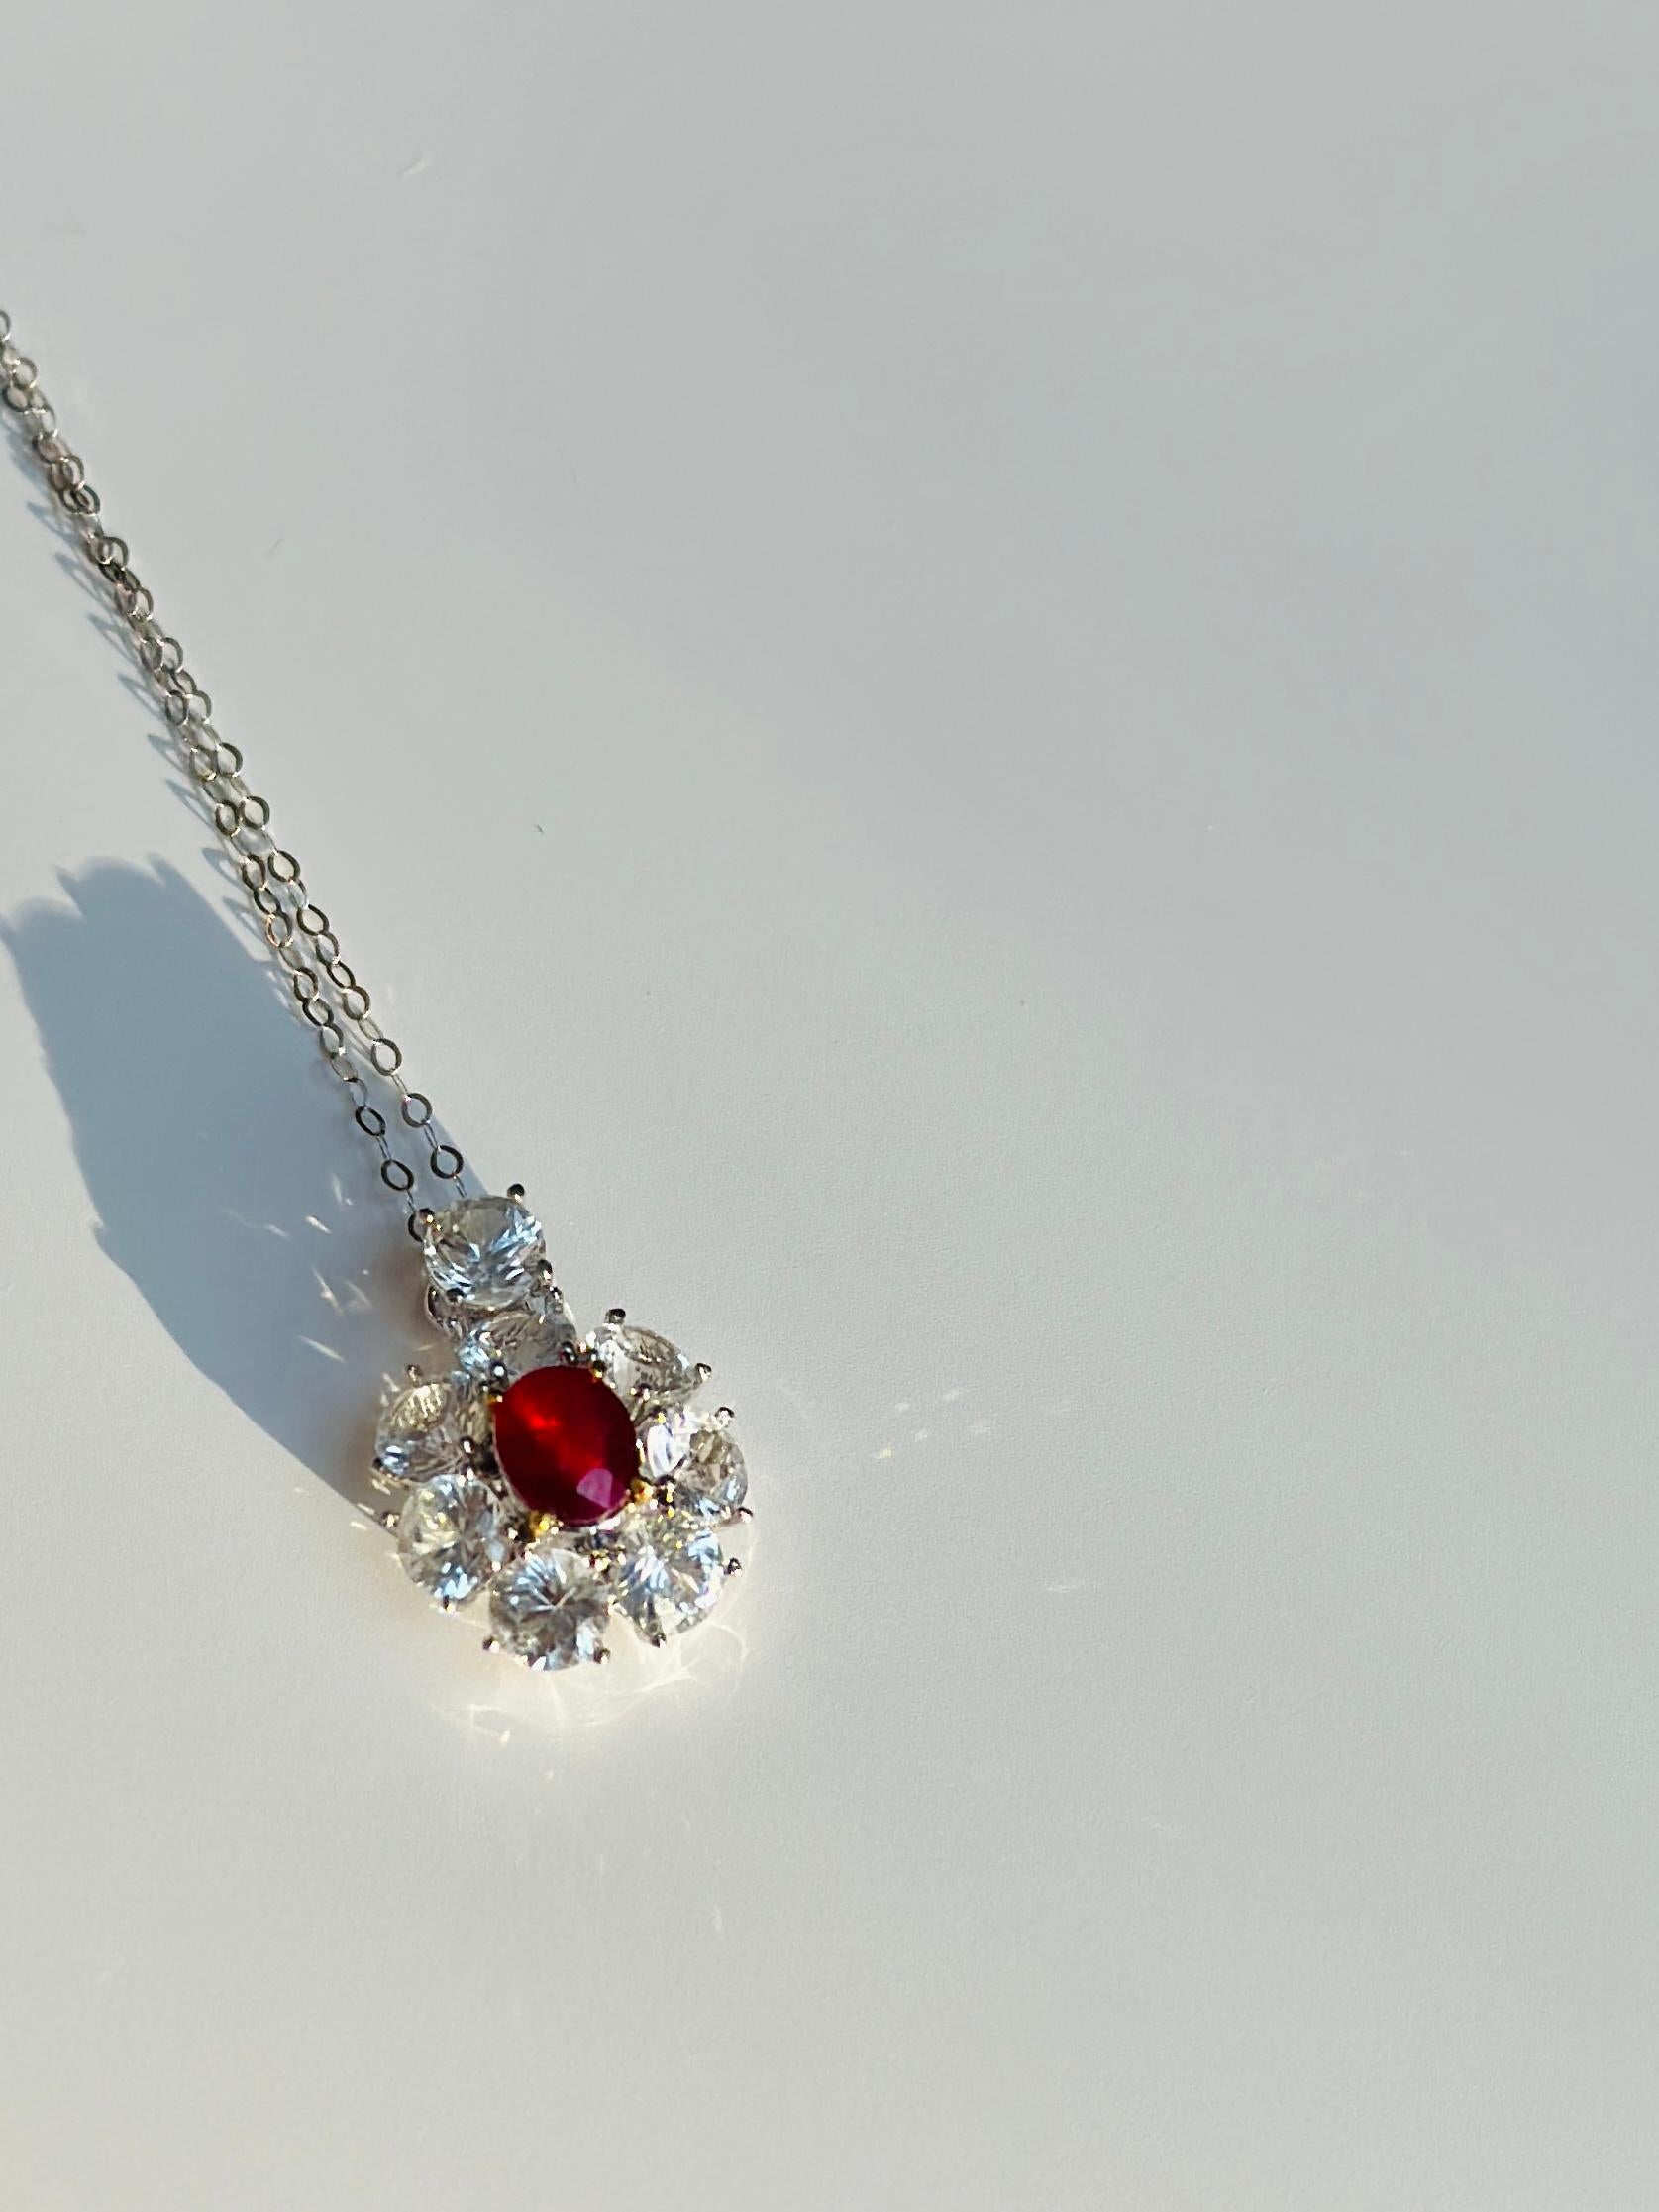 This gorgeous piece of jewelry features a stunning ruby and white sapphire pendant set in 18-karat gold. The pendant showcases a radiant ruby in the center, surrounded by shimmering white sapphires, creating a captivating contrast of colors. The